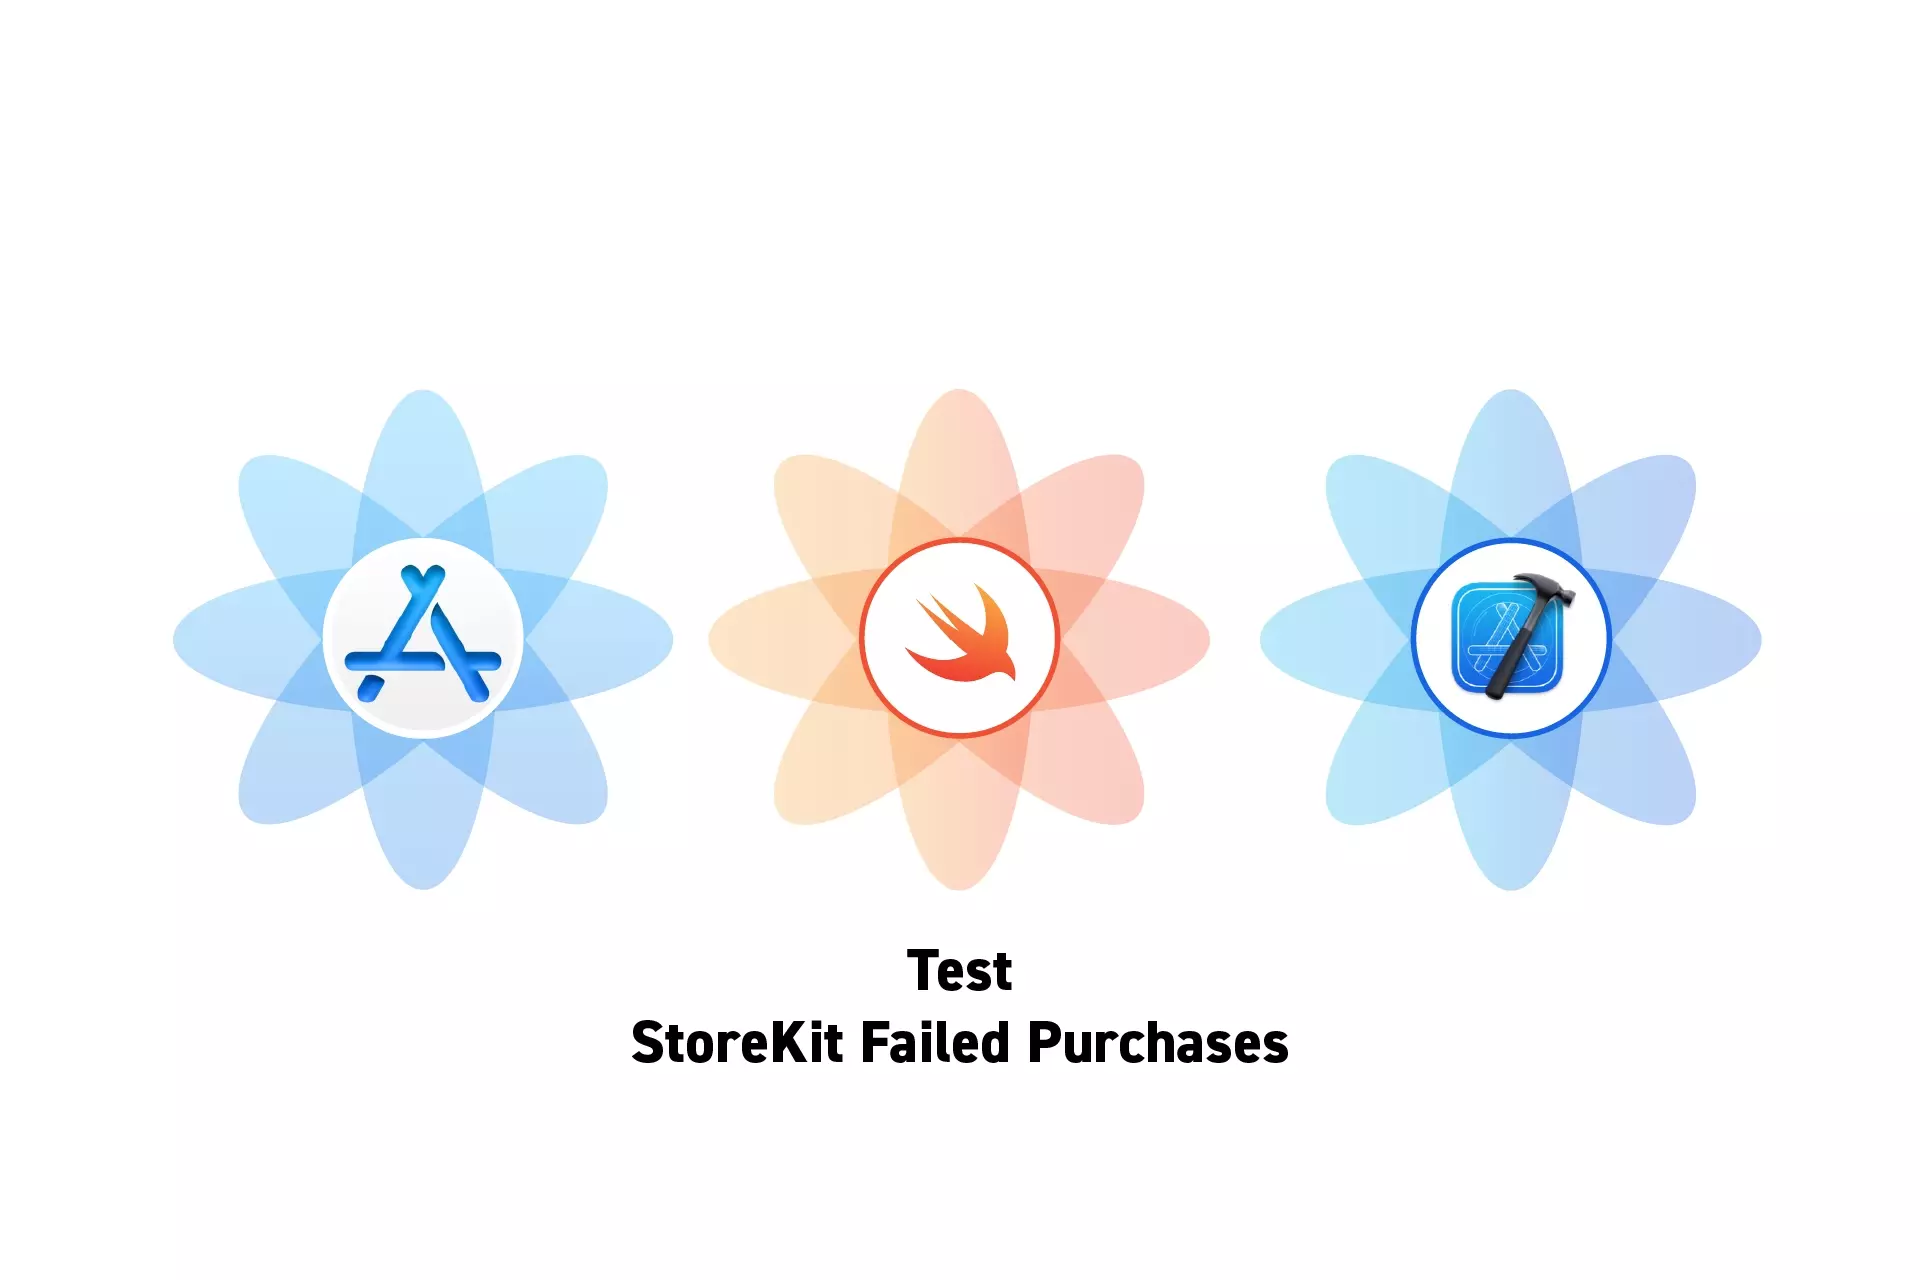 Three flowers that represent StoreKit, Swift and XCode side by side. Beneath them sits the text “Test StoreKit Failed Purchases.”